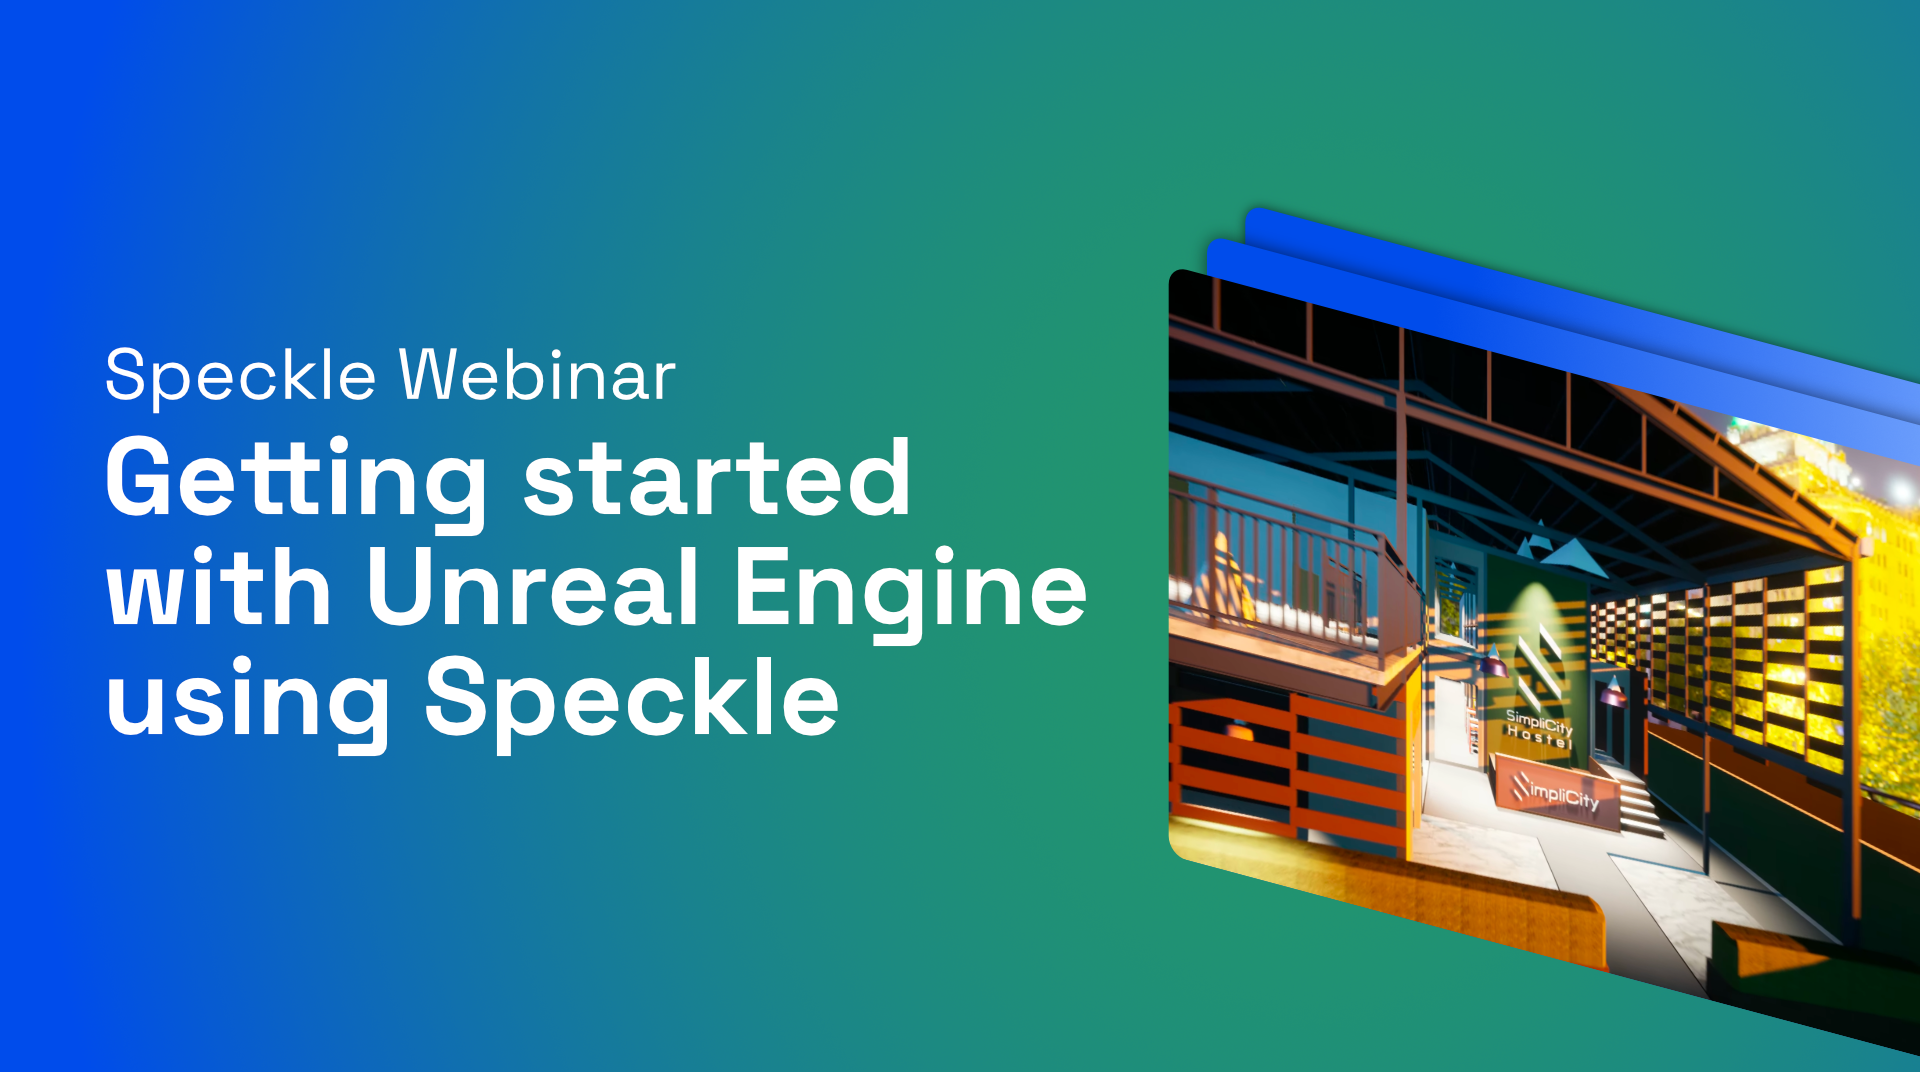 Webinar: Getting started with Unreal Engine using Speckle